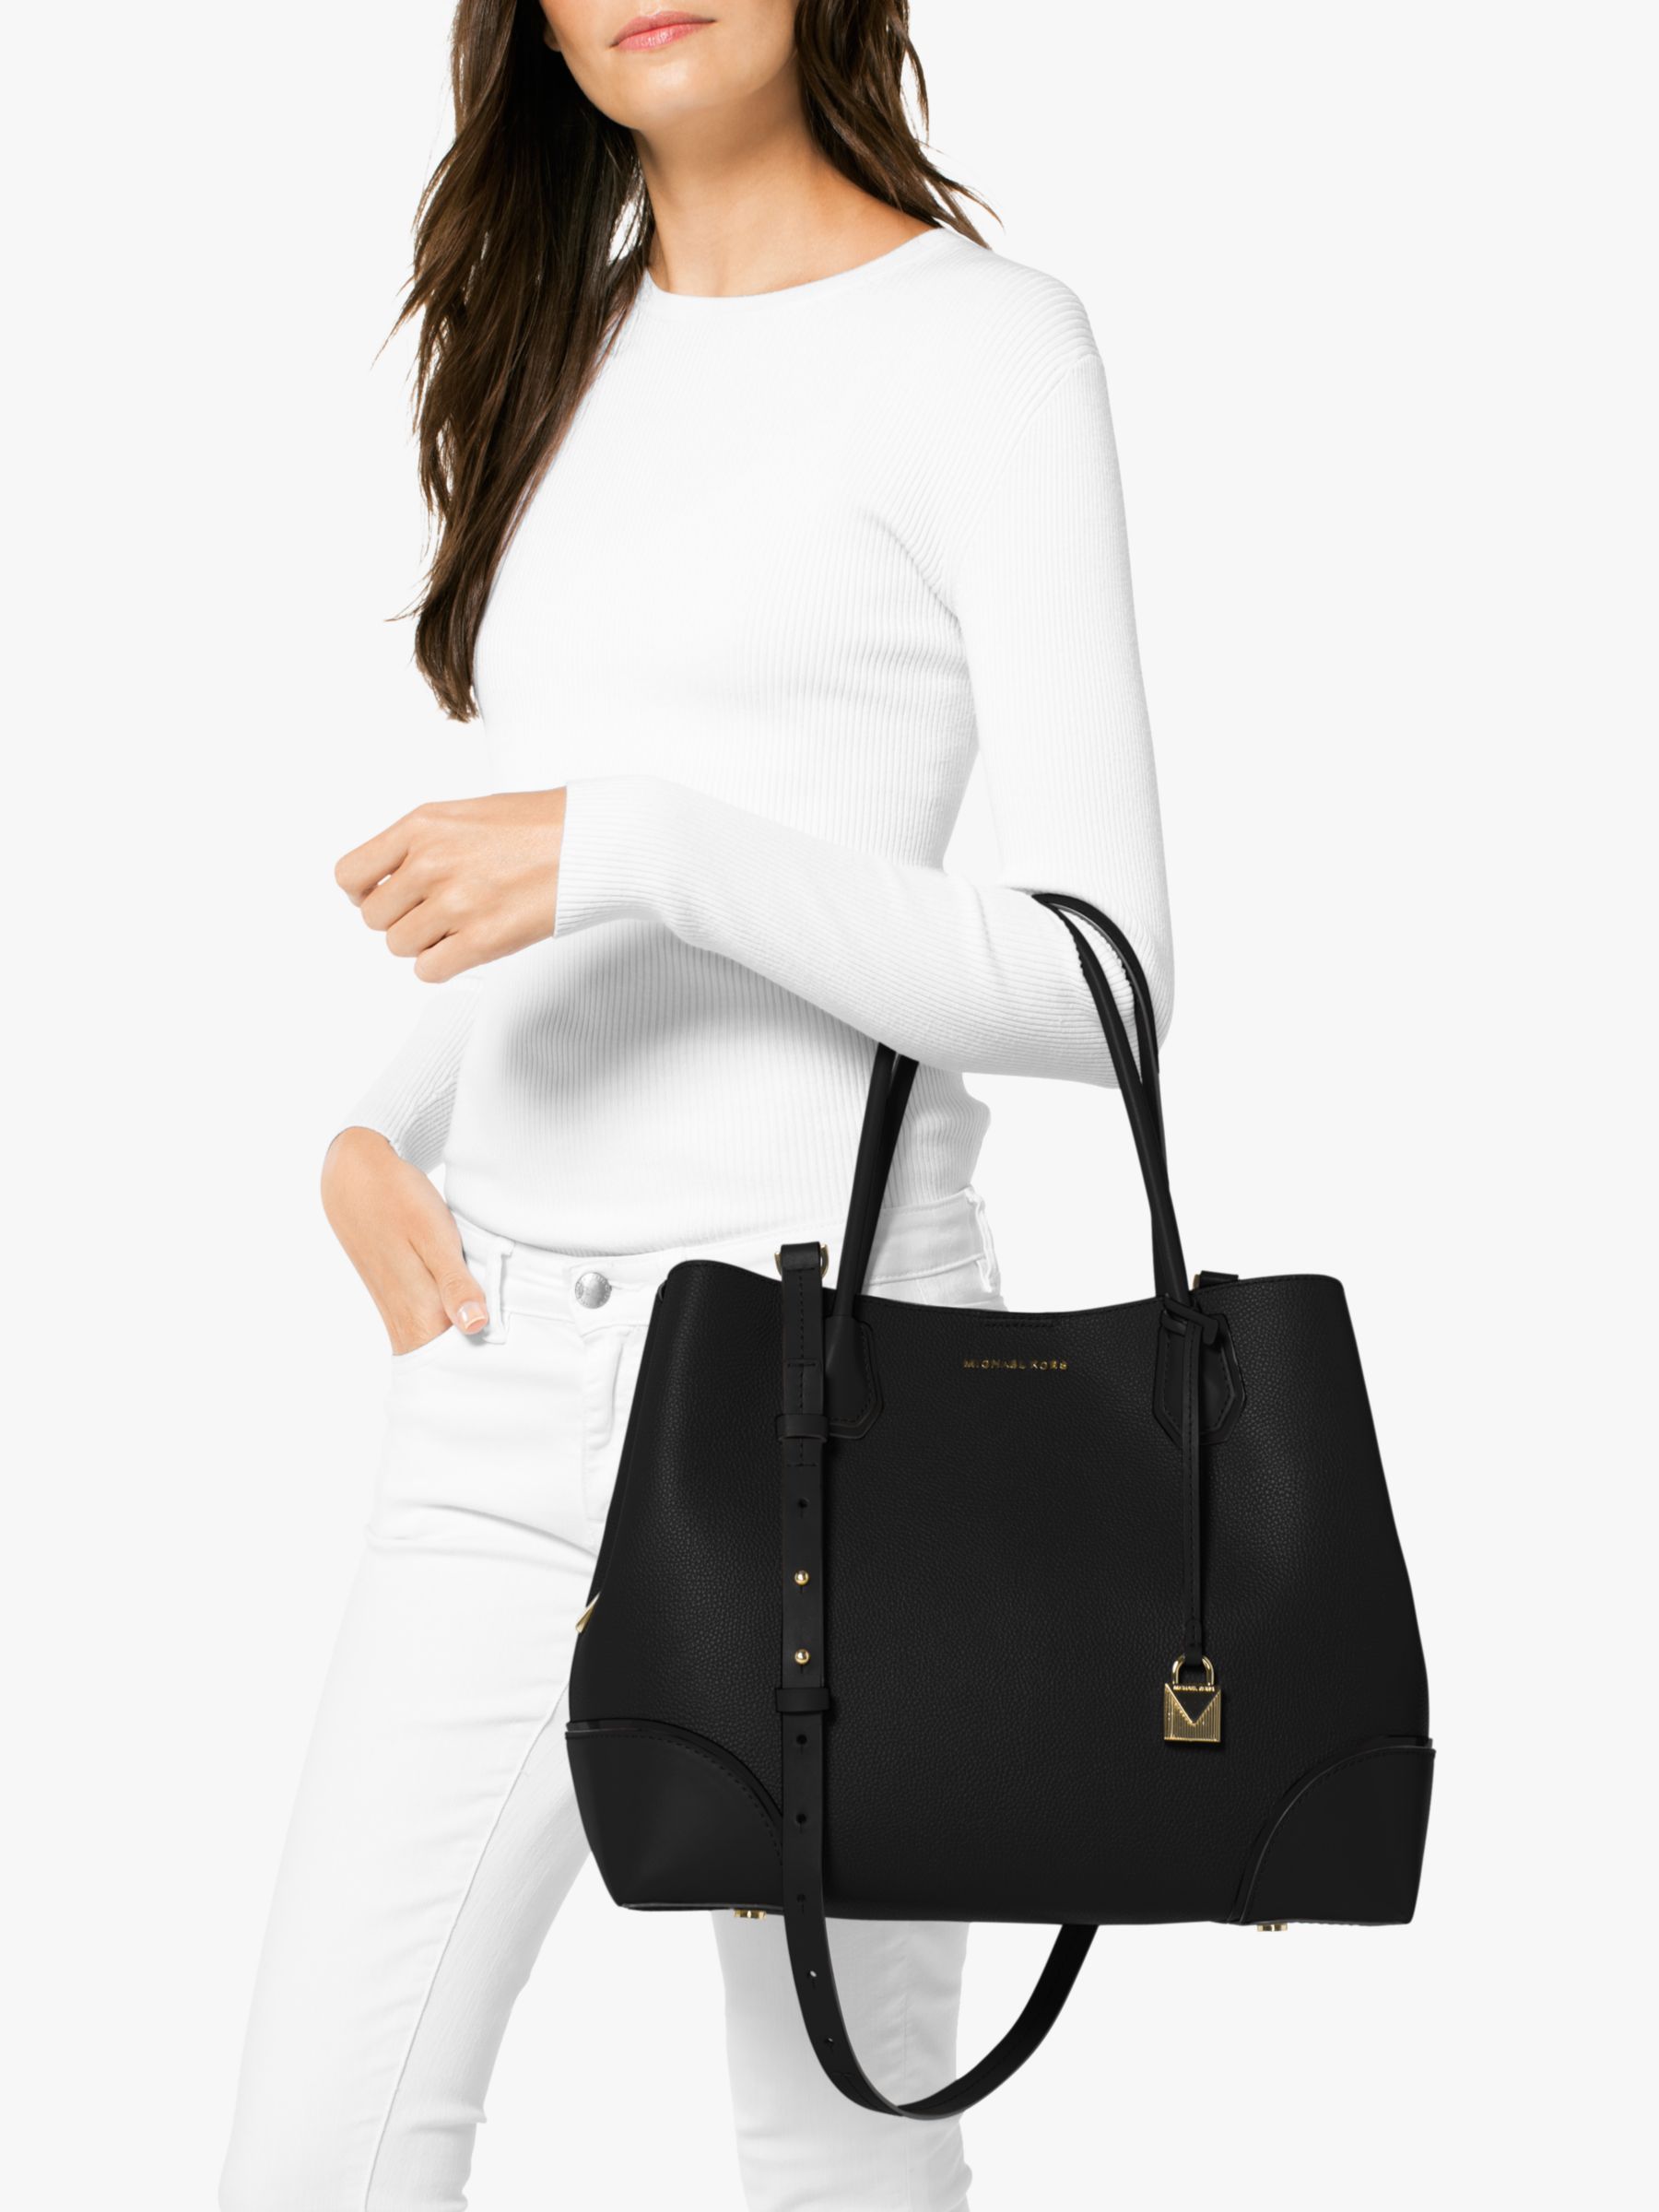 mercer gallery large leather satchel